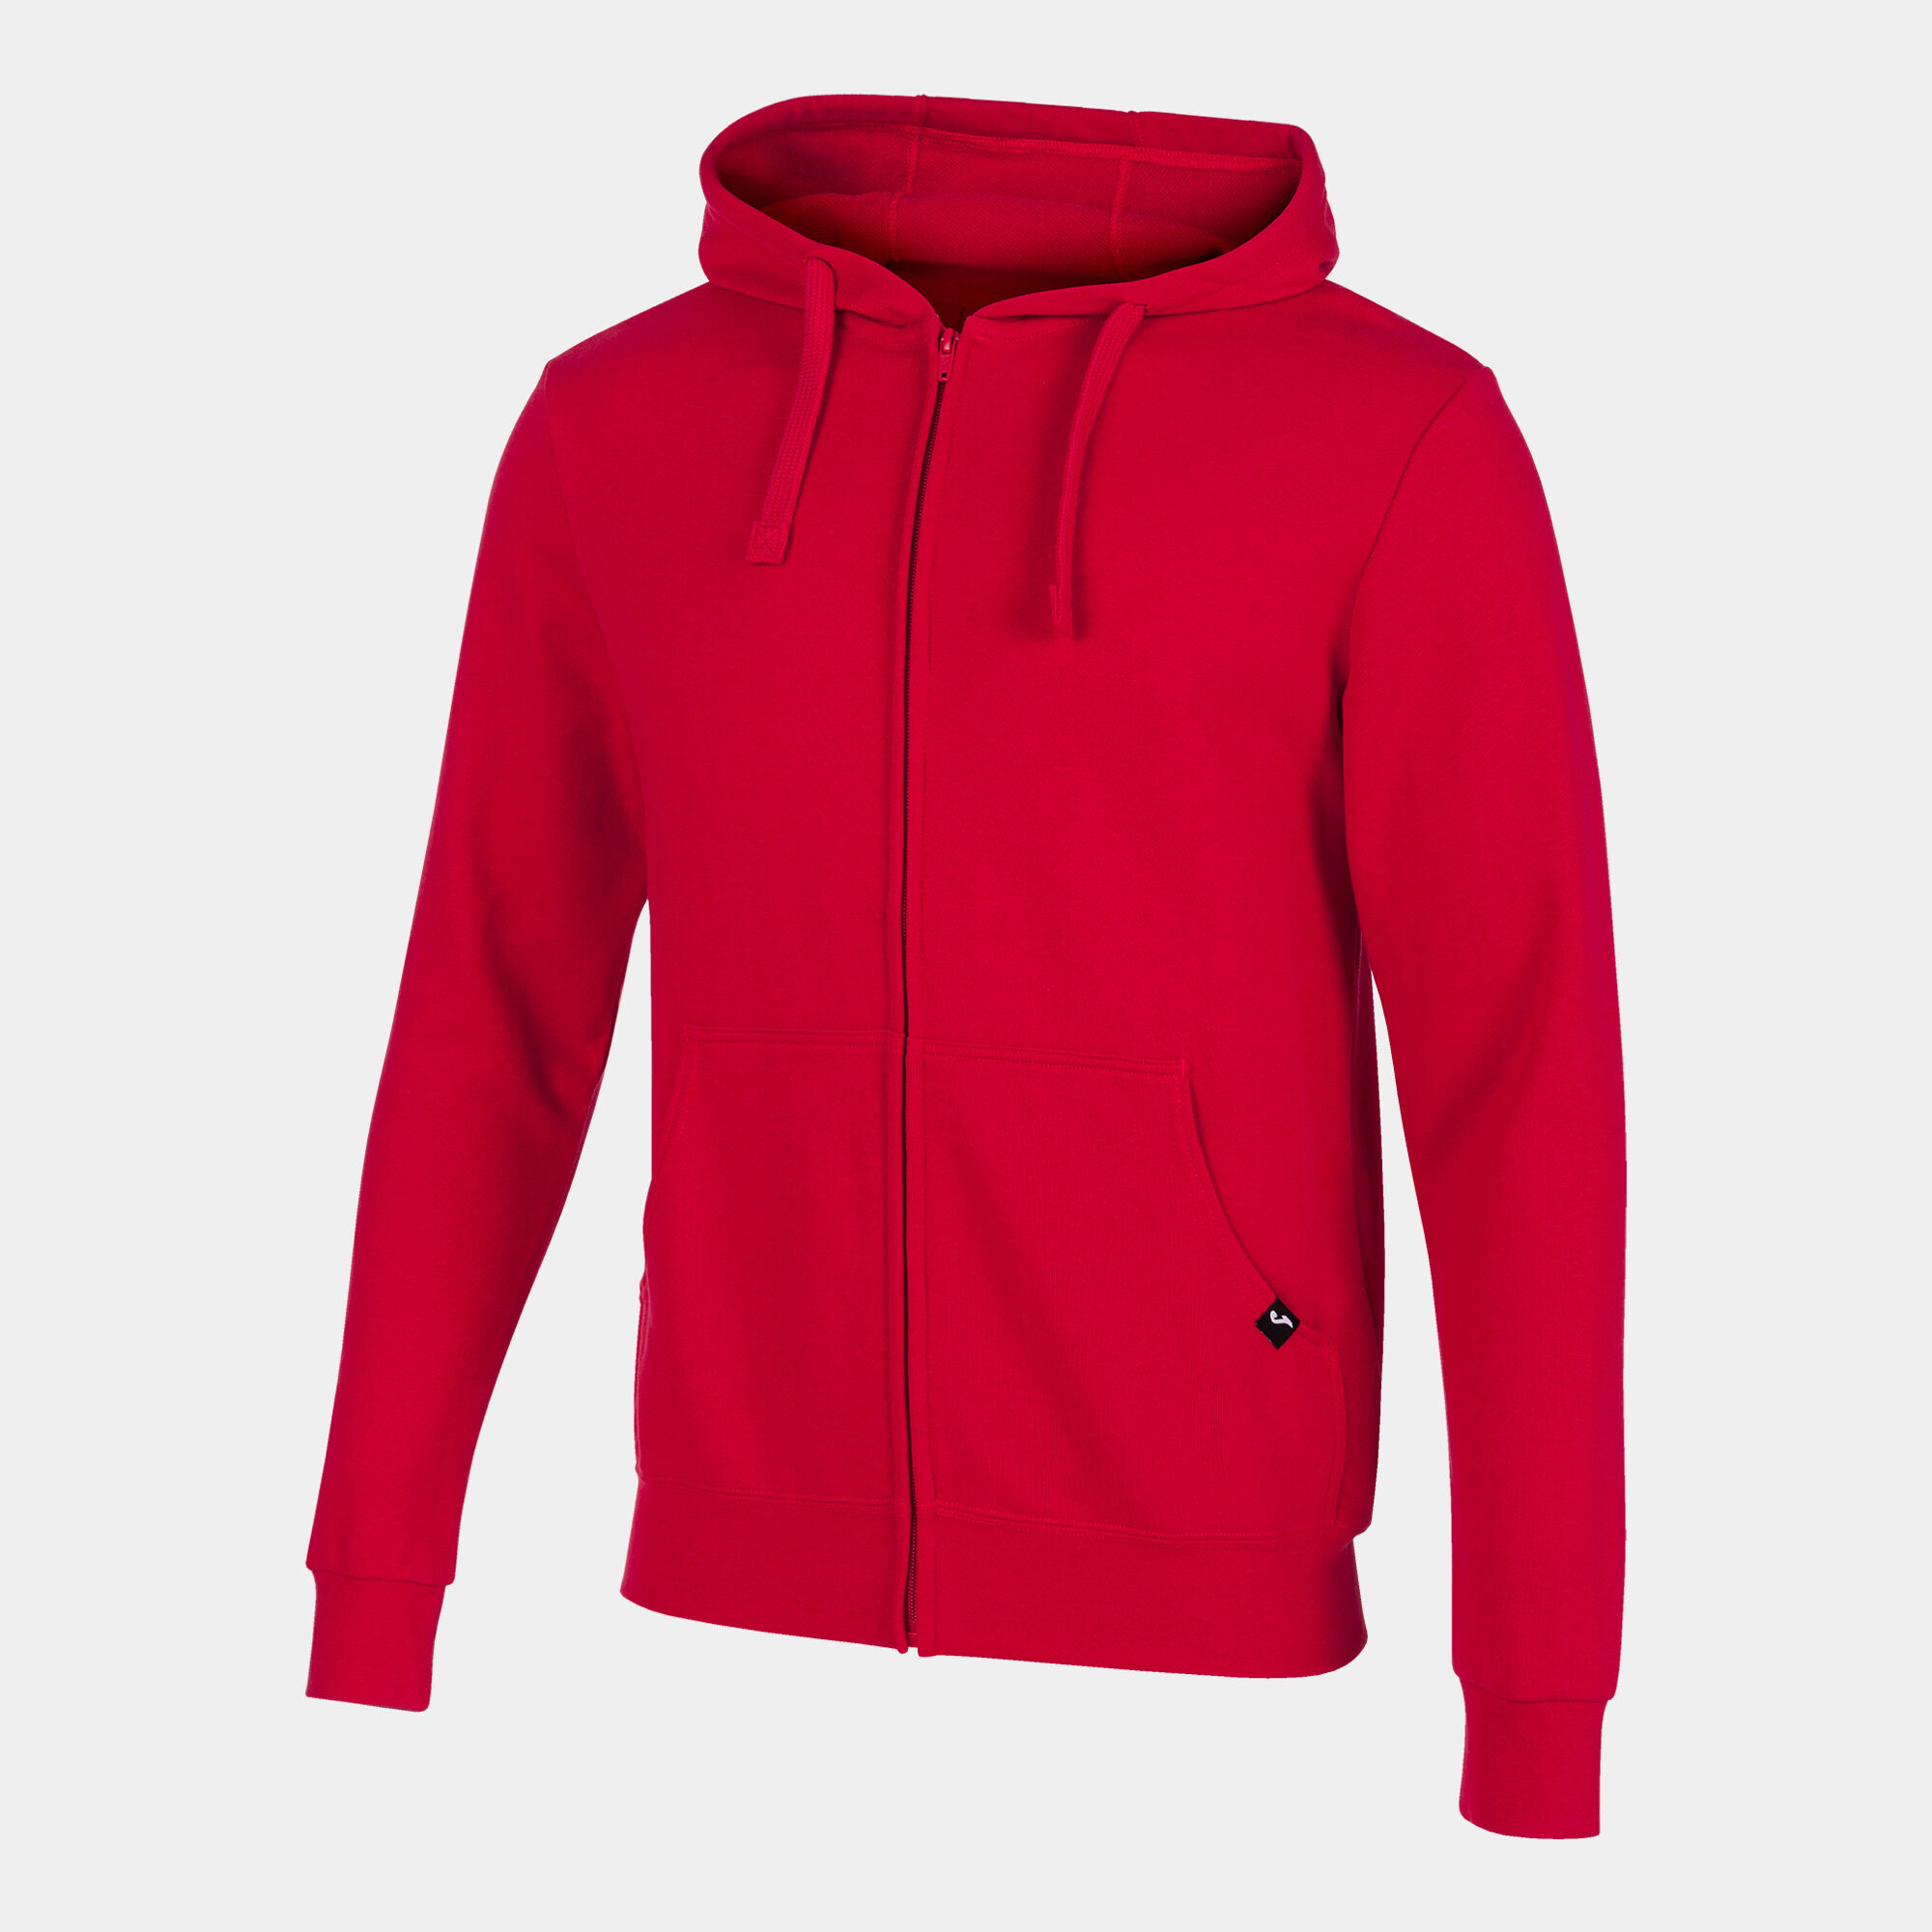 HOODED JACKET MAN JUNGLE RED